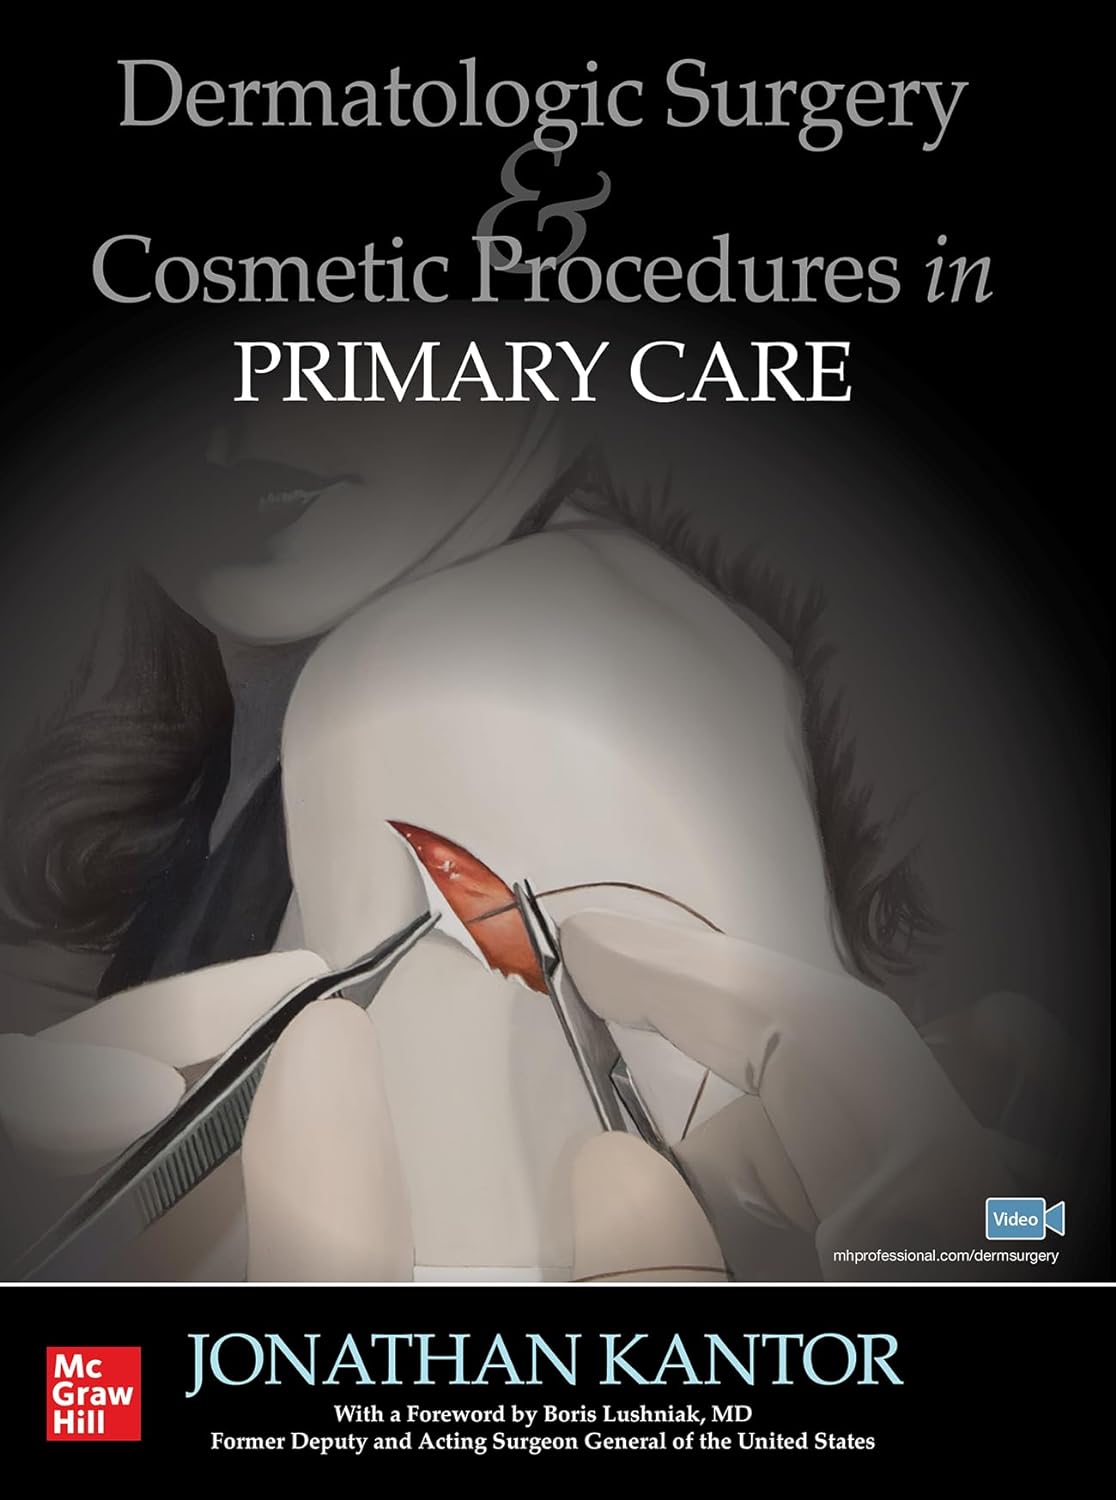 Dermatologic-Surgery-and-Cosmetic-Procedures-in-Primary-Care-Practice-1st-Edition-1.jpg